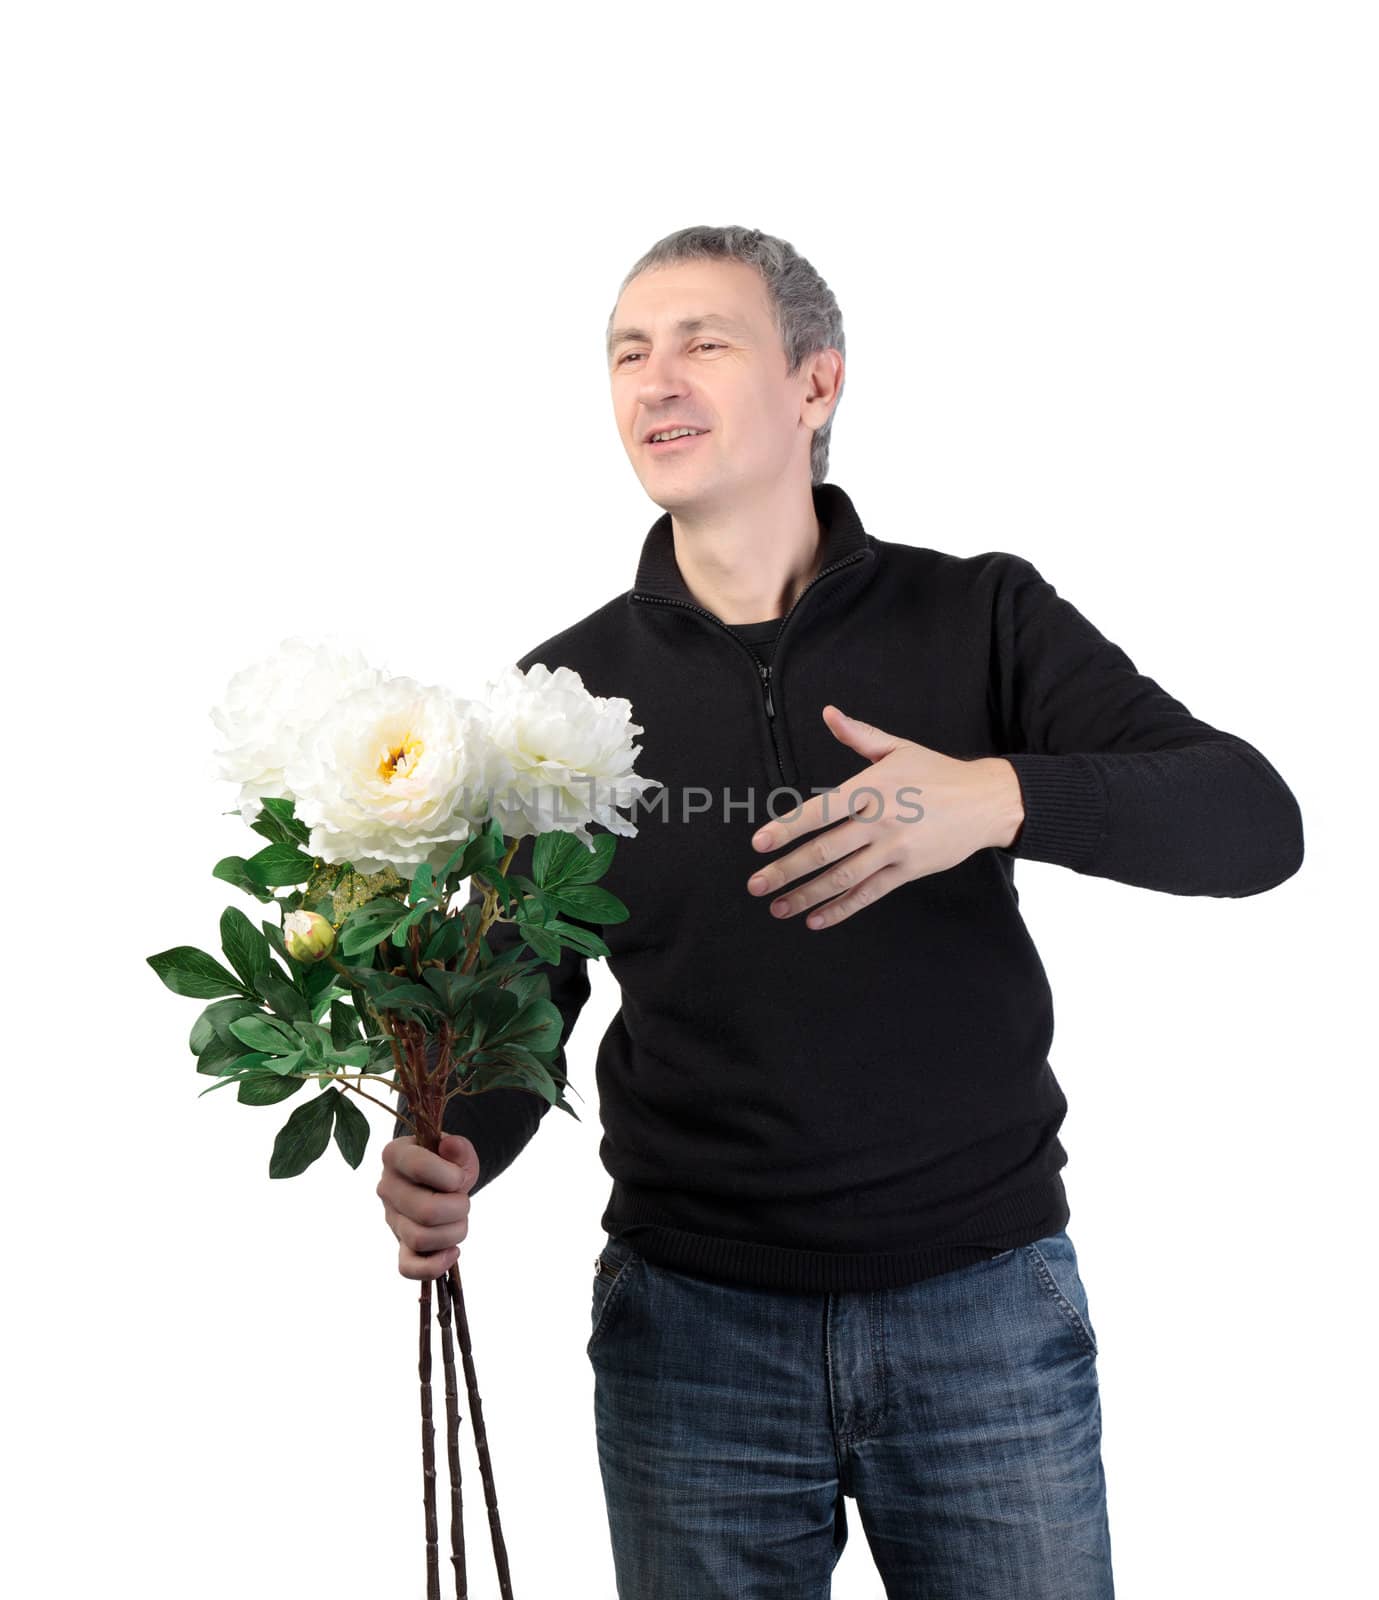 Man holding a bouquet of flowers on white background